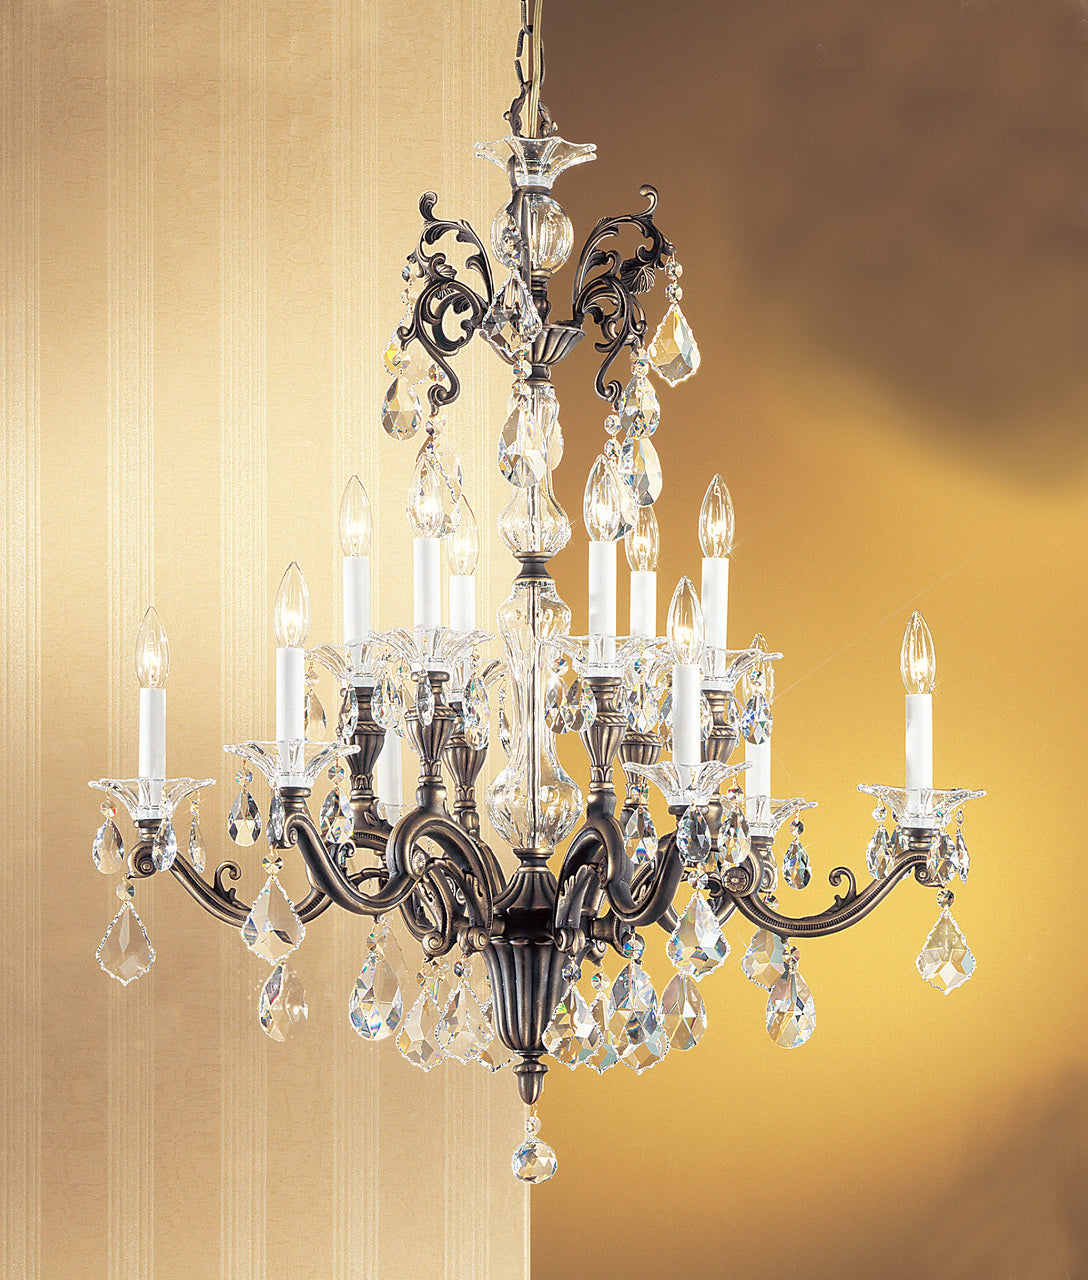 Classic Lighting 57112 RB CBK Via Firenze Crystal Chandelier in Roman Bronze (Imported from Spain)